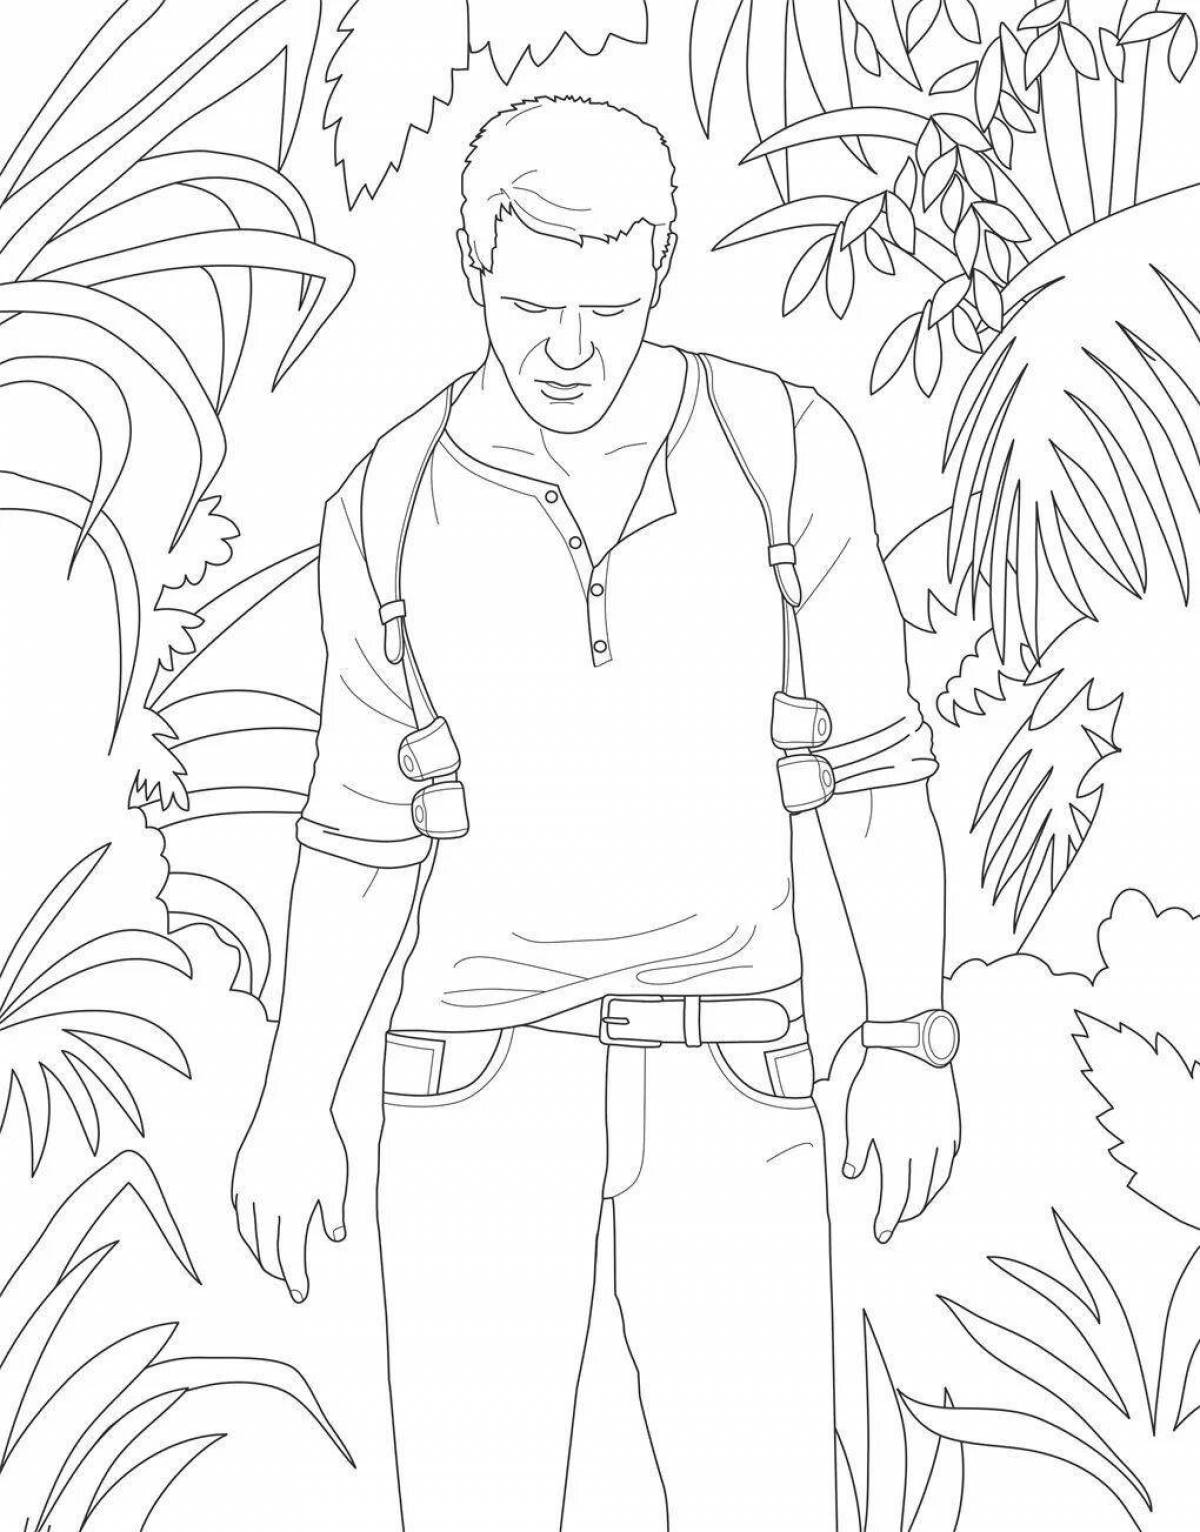 Uncharted adventure coloring book